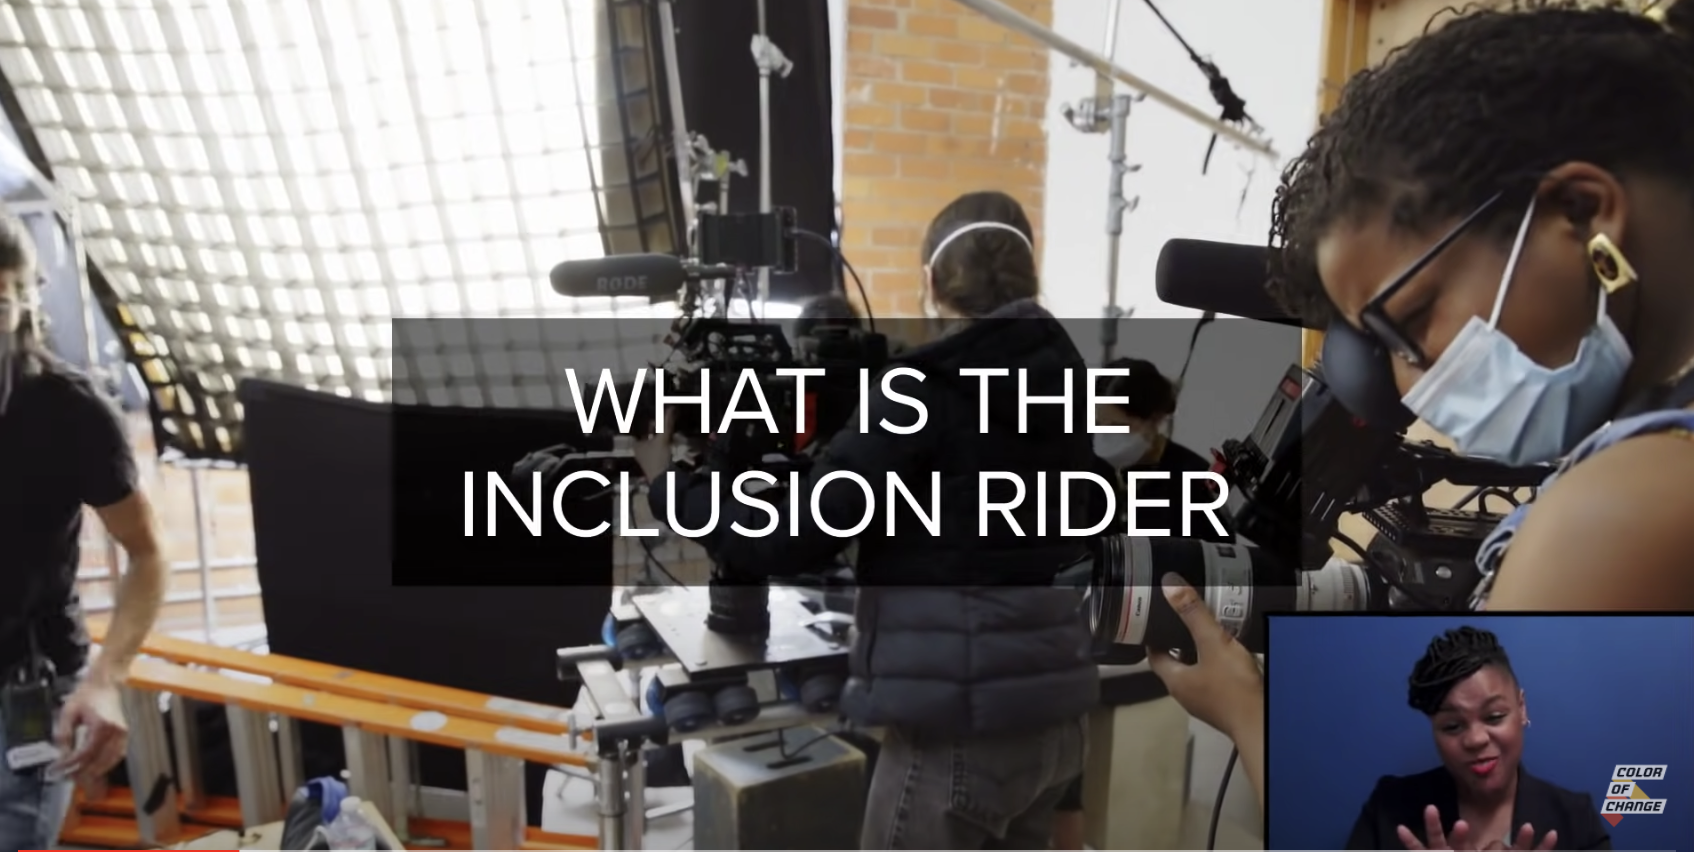 "What is the inclusion rider" superimposed over a collage of filmmakers